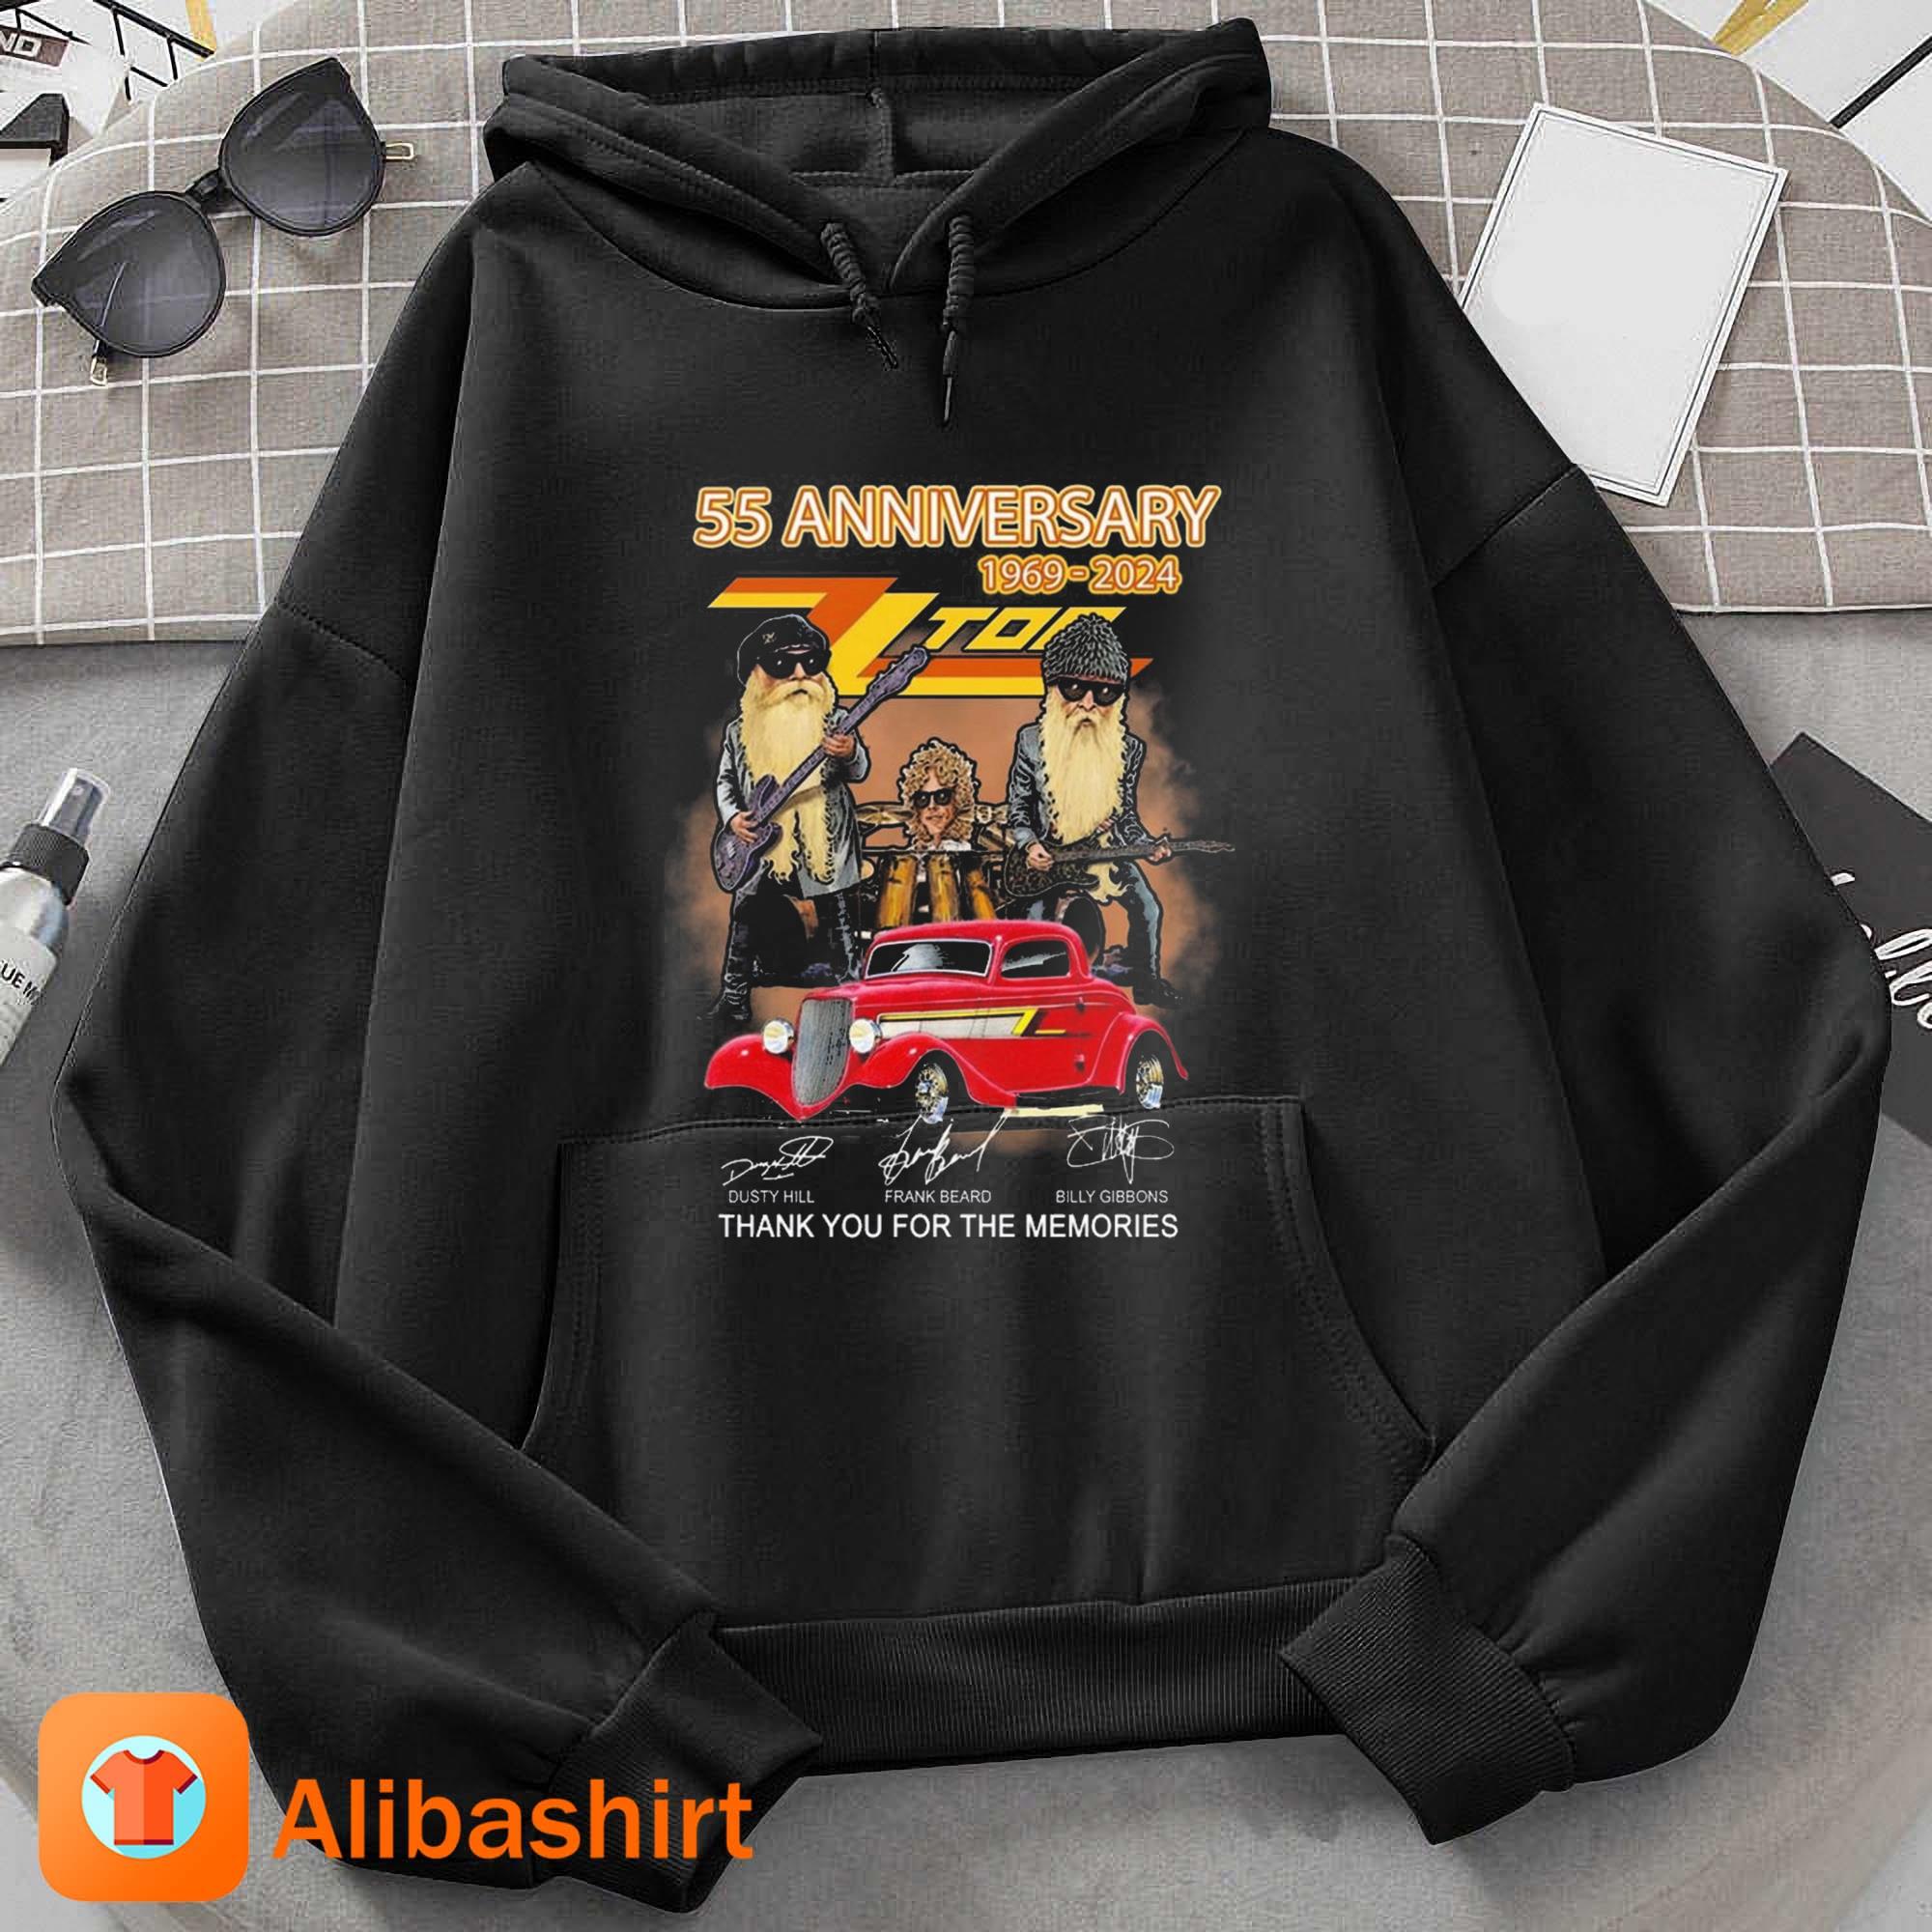 55 Years 1969-2024 ZZ Top Dusty Hill Frank Beard Billy Gibbons Thank You For The Memories Signatures Shirt Hoodie